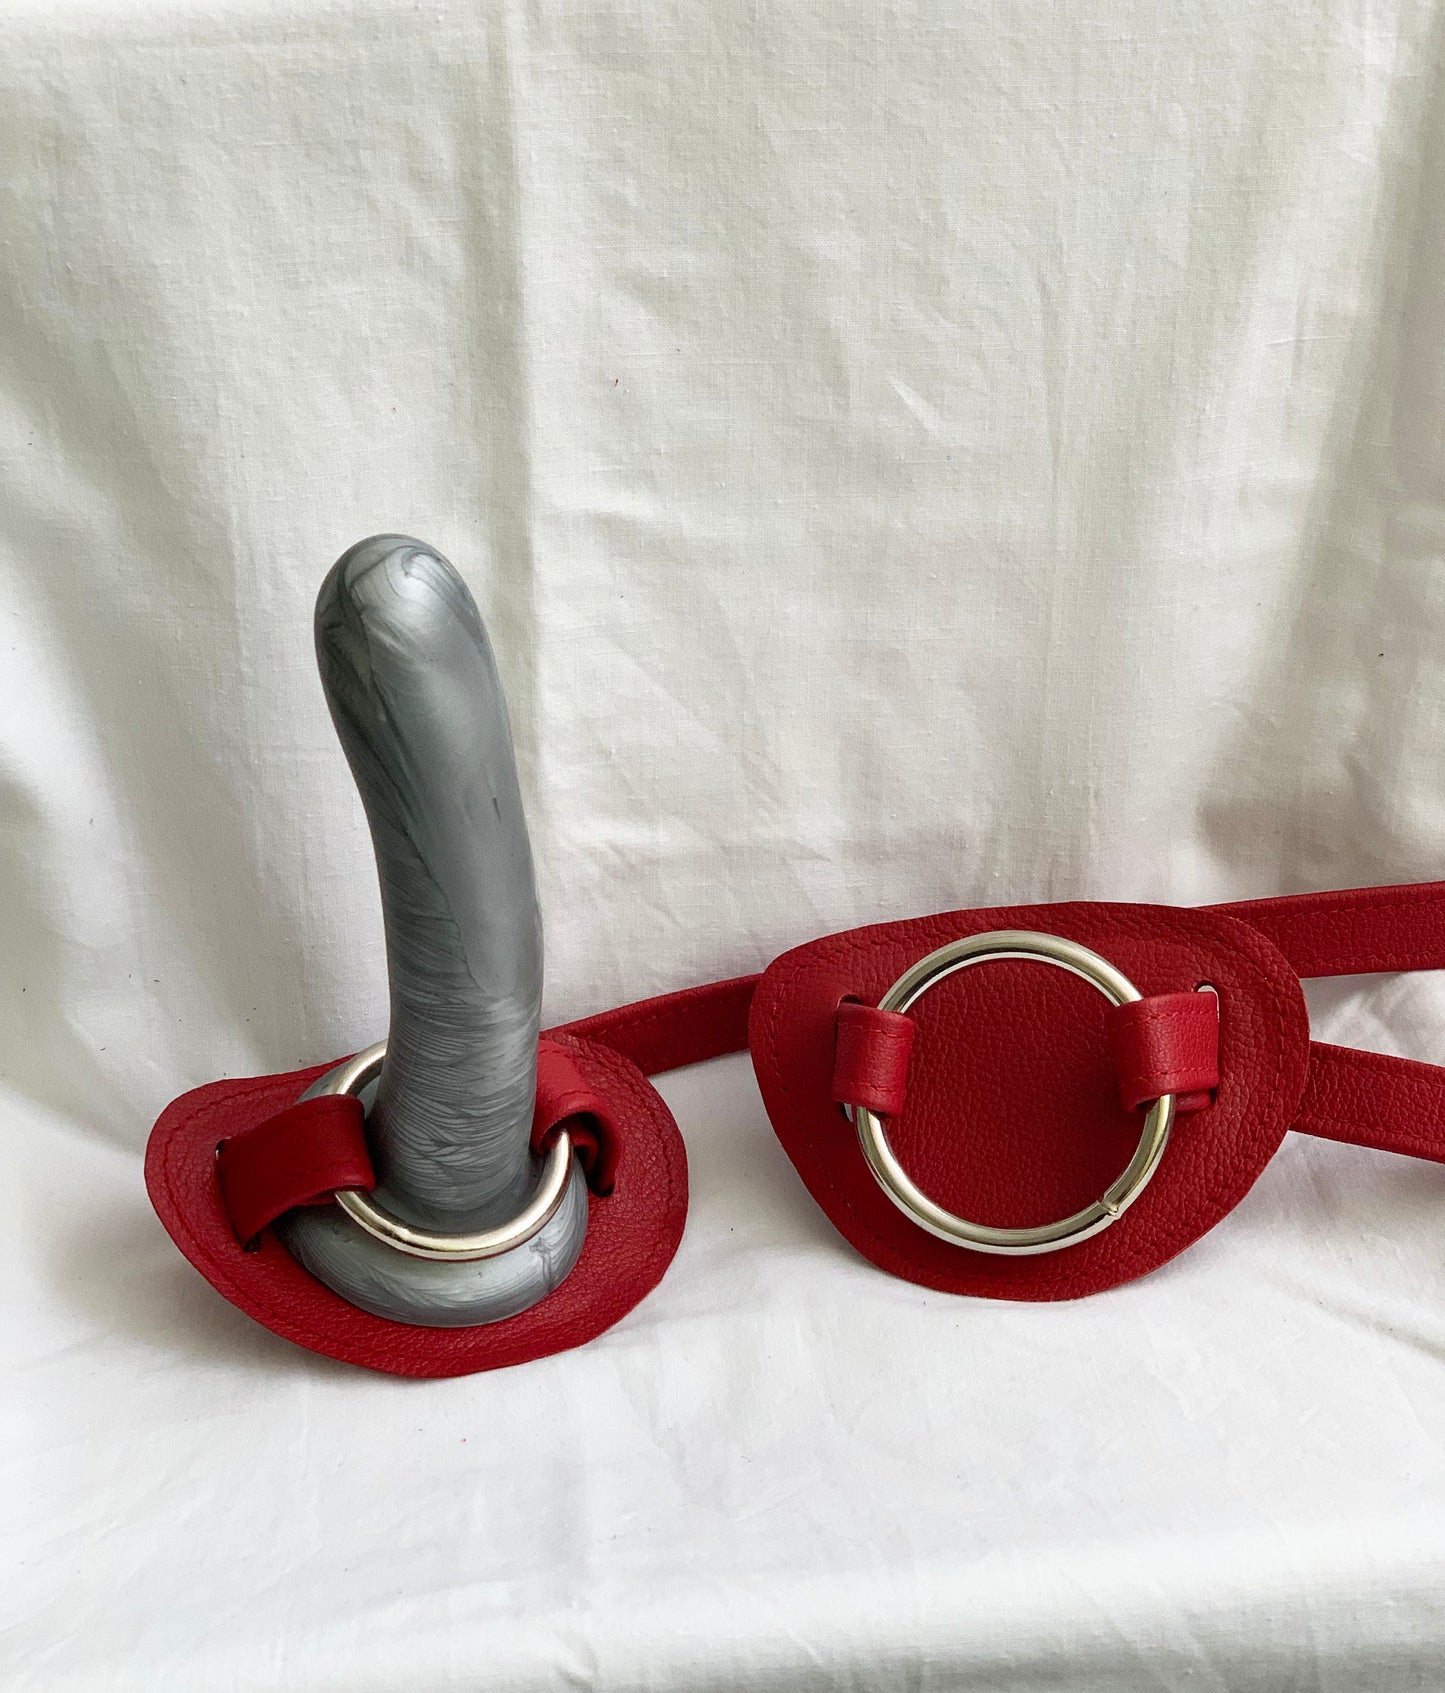 Hand Strapon Harness (Knucklefucker) - Red Leather (One Size)